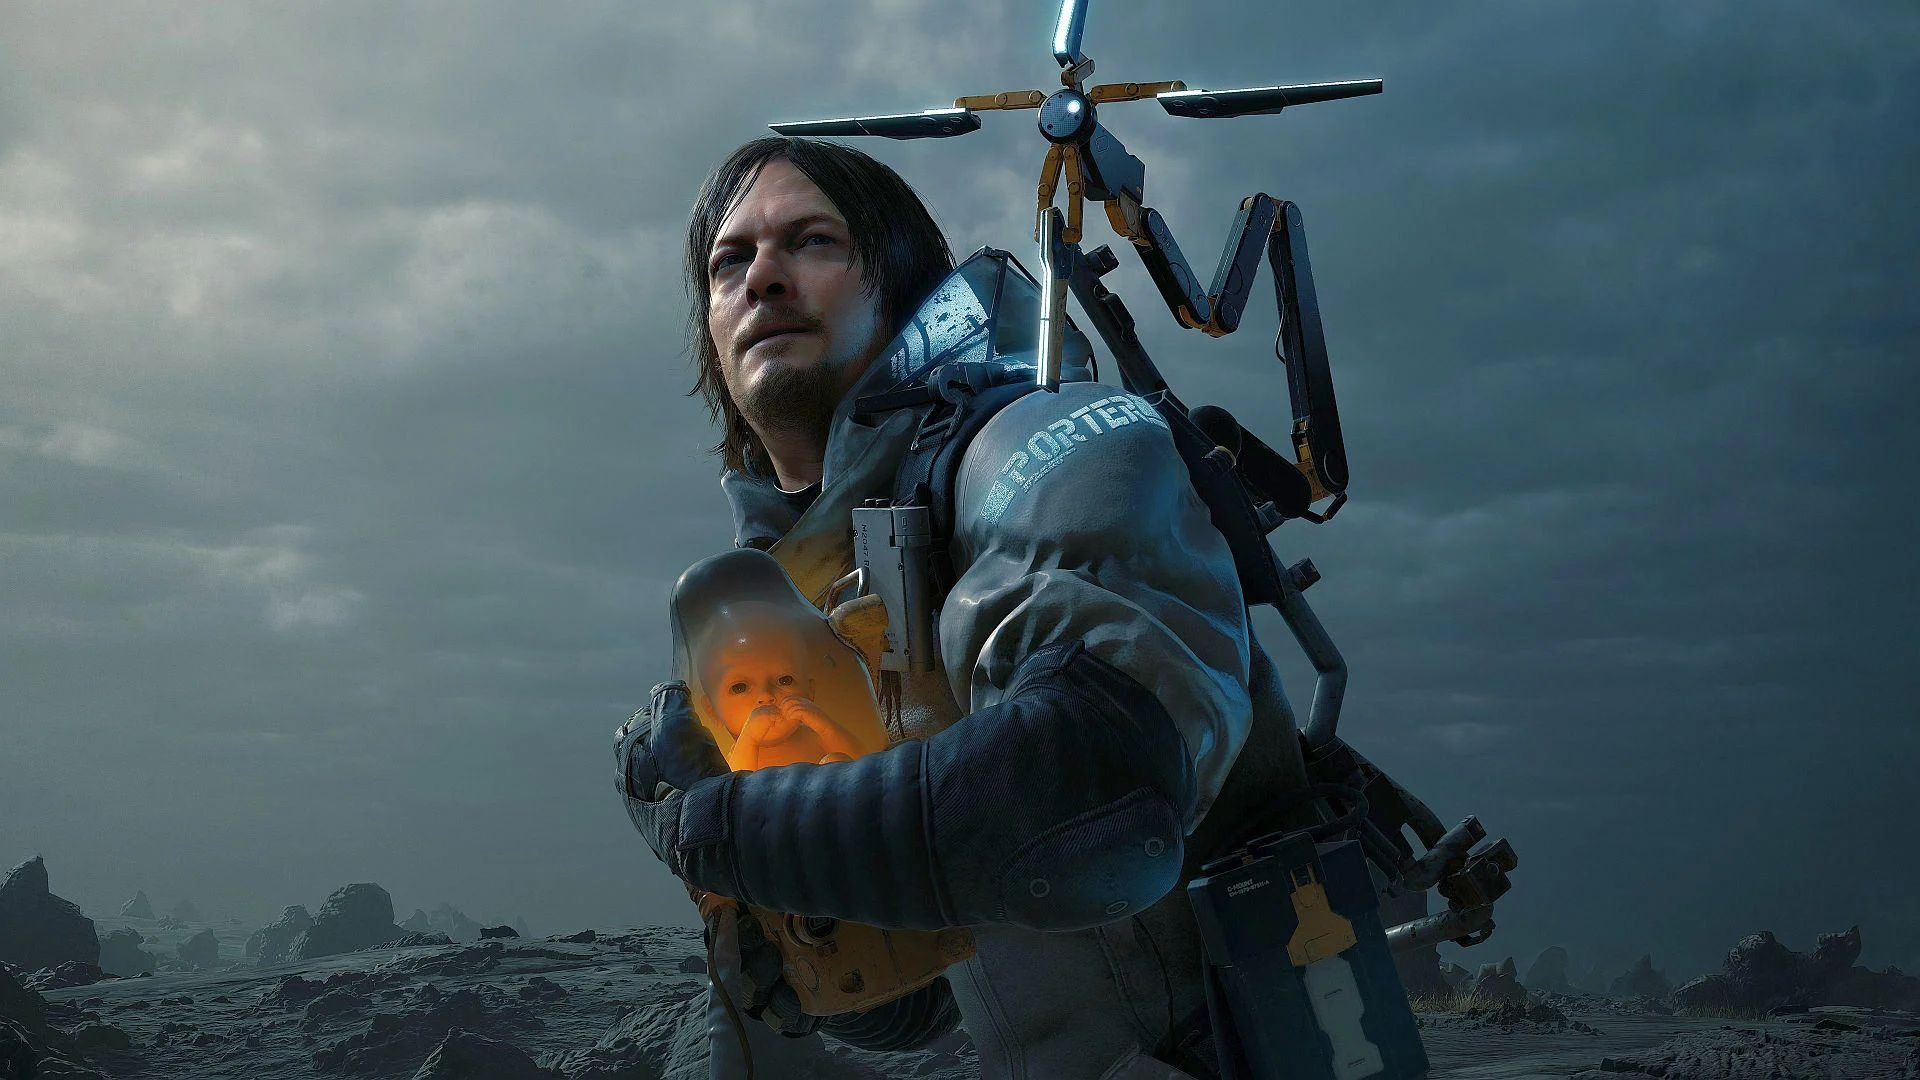 Sequel to Death Stranding could be released simultaneously on PC and consoles